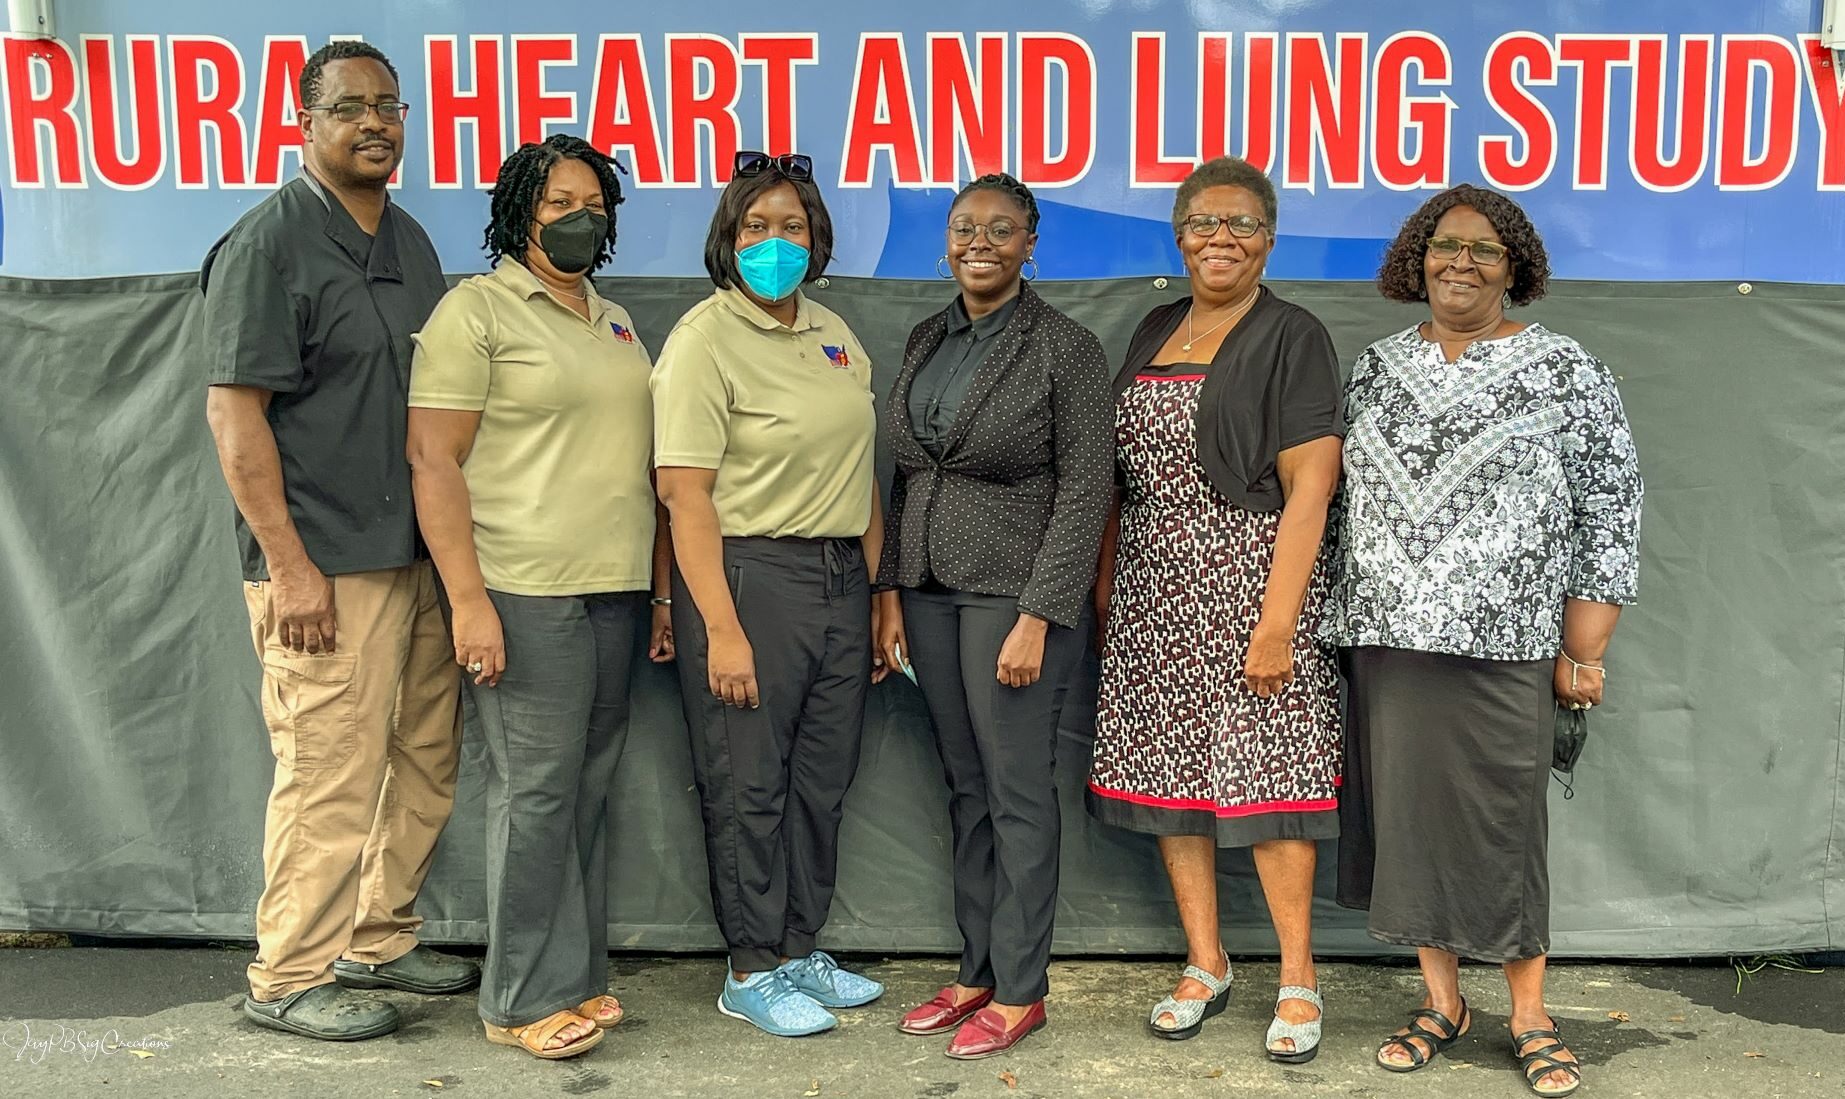 Pictured from left to right (CAB member, Commissioner John Moton, AL Community Engagement Coordinator, Ethel Johnson, Dr. Shauntice Allen, CAB members, Jasmine Kennedy, Doris Smith, and Rose Garner)